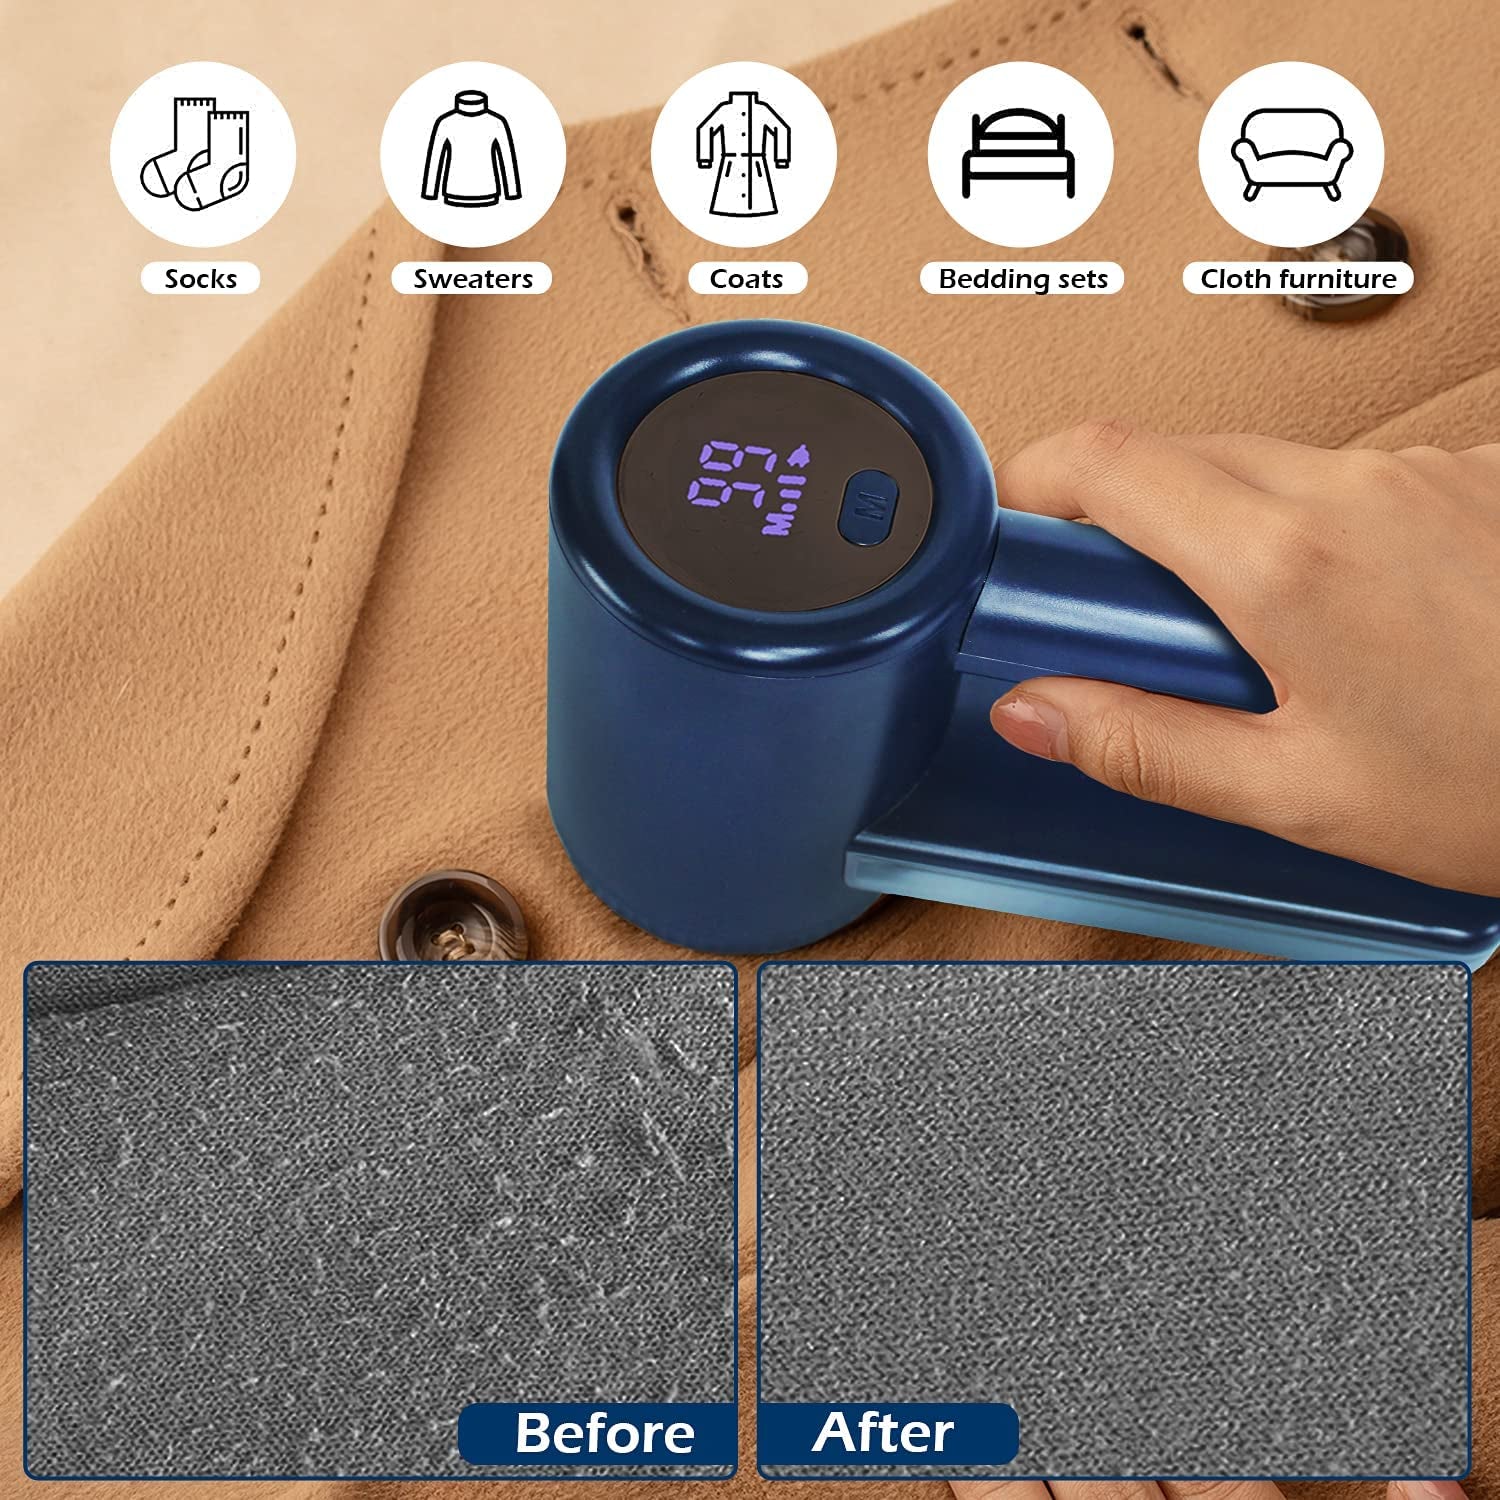 Rechargeable Fabric Shaver, Electric Commercial Lint Remover with LED Display & Big Trash Box, 3-Speeds for Removing Fuzz and Pill from Clothes, Furniture, Sweater, Couch and Blanket, Navy